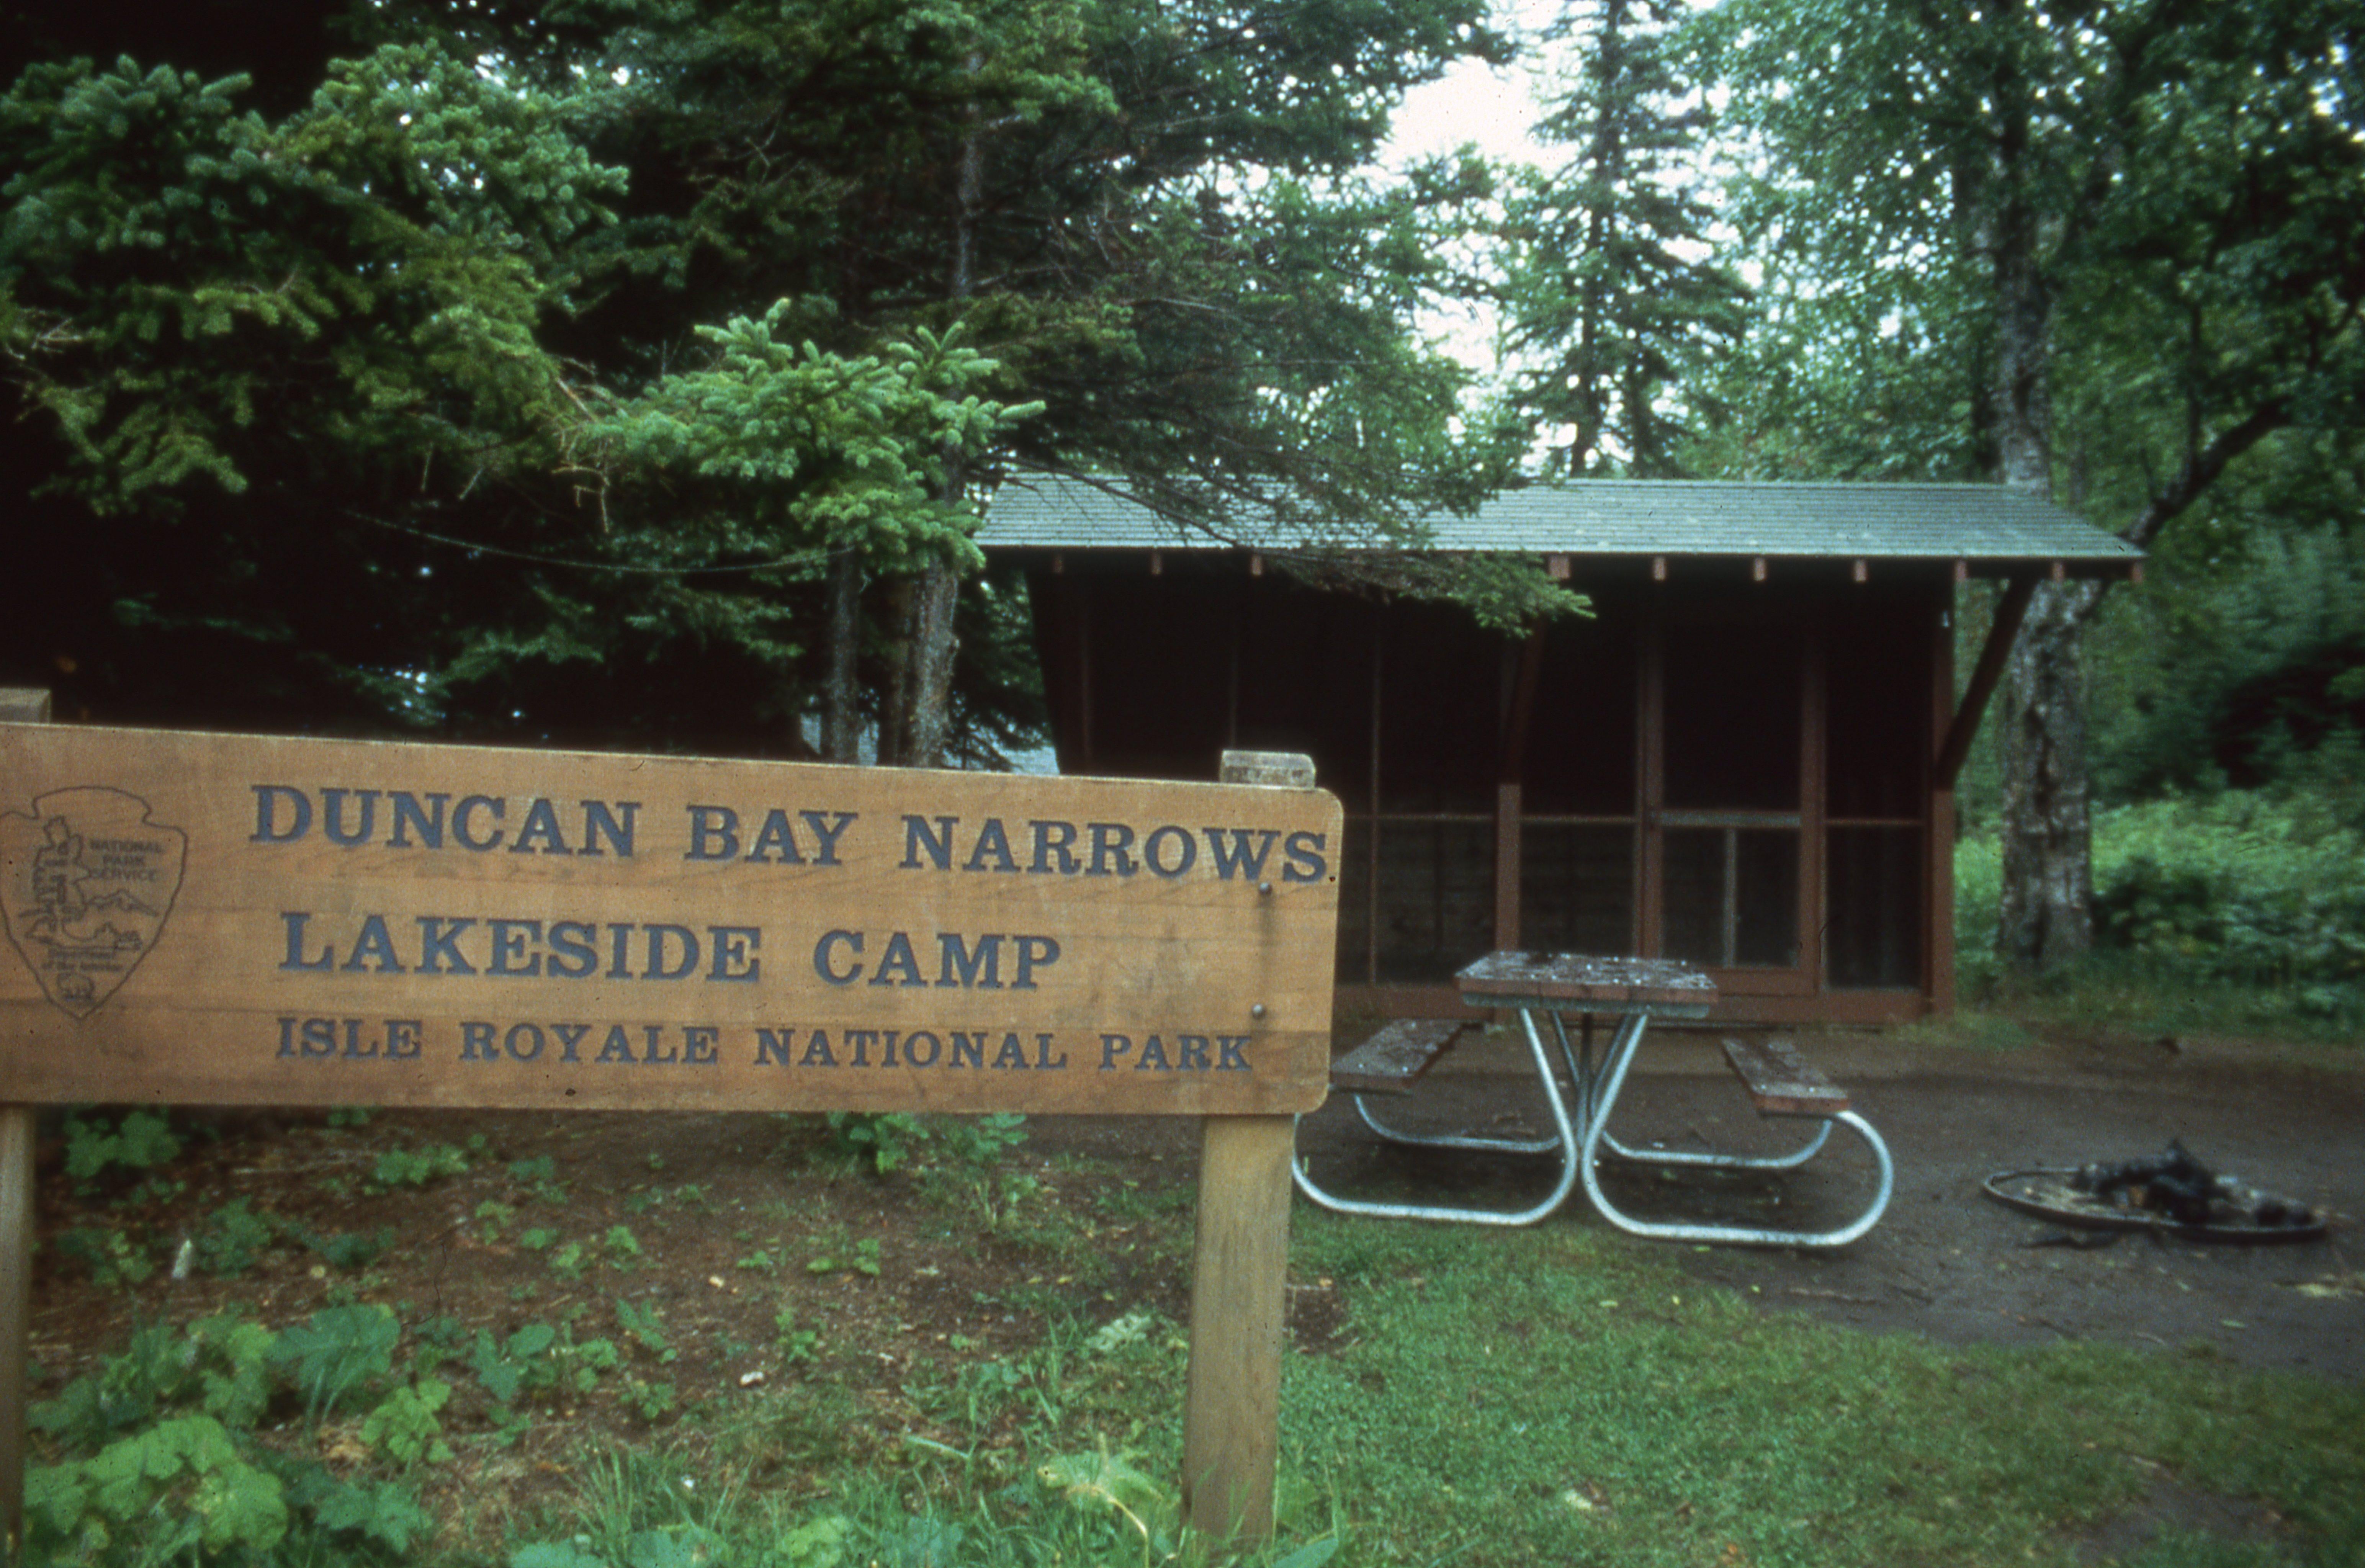 Camper submitted image from Duncan Narrows Campground — Isle Royale National Park - 1